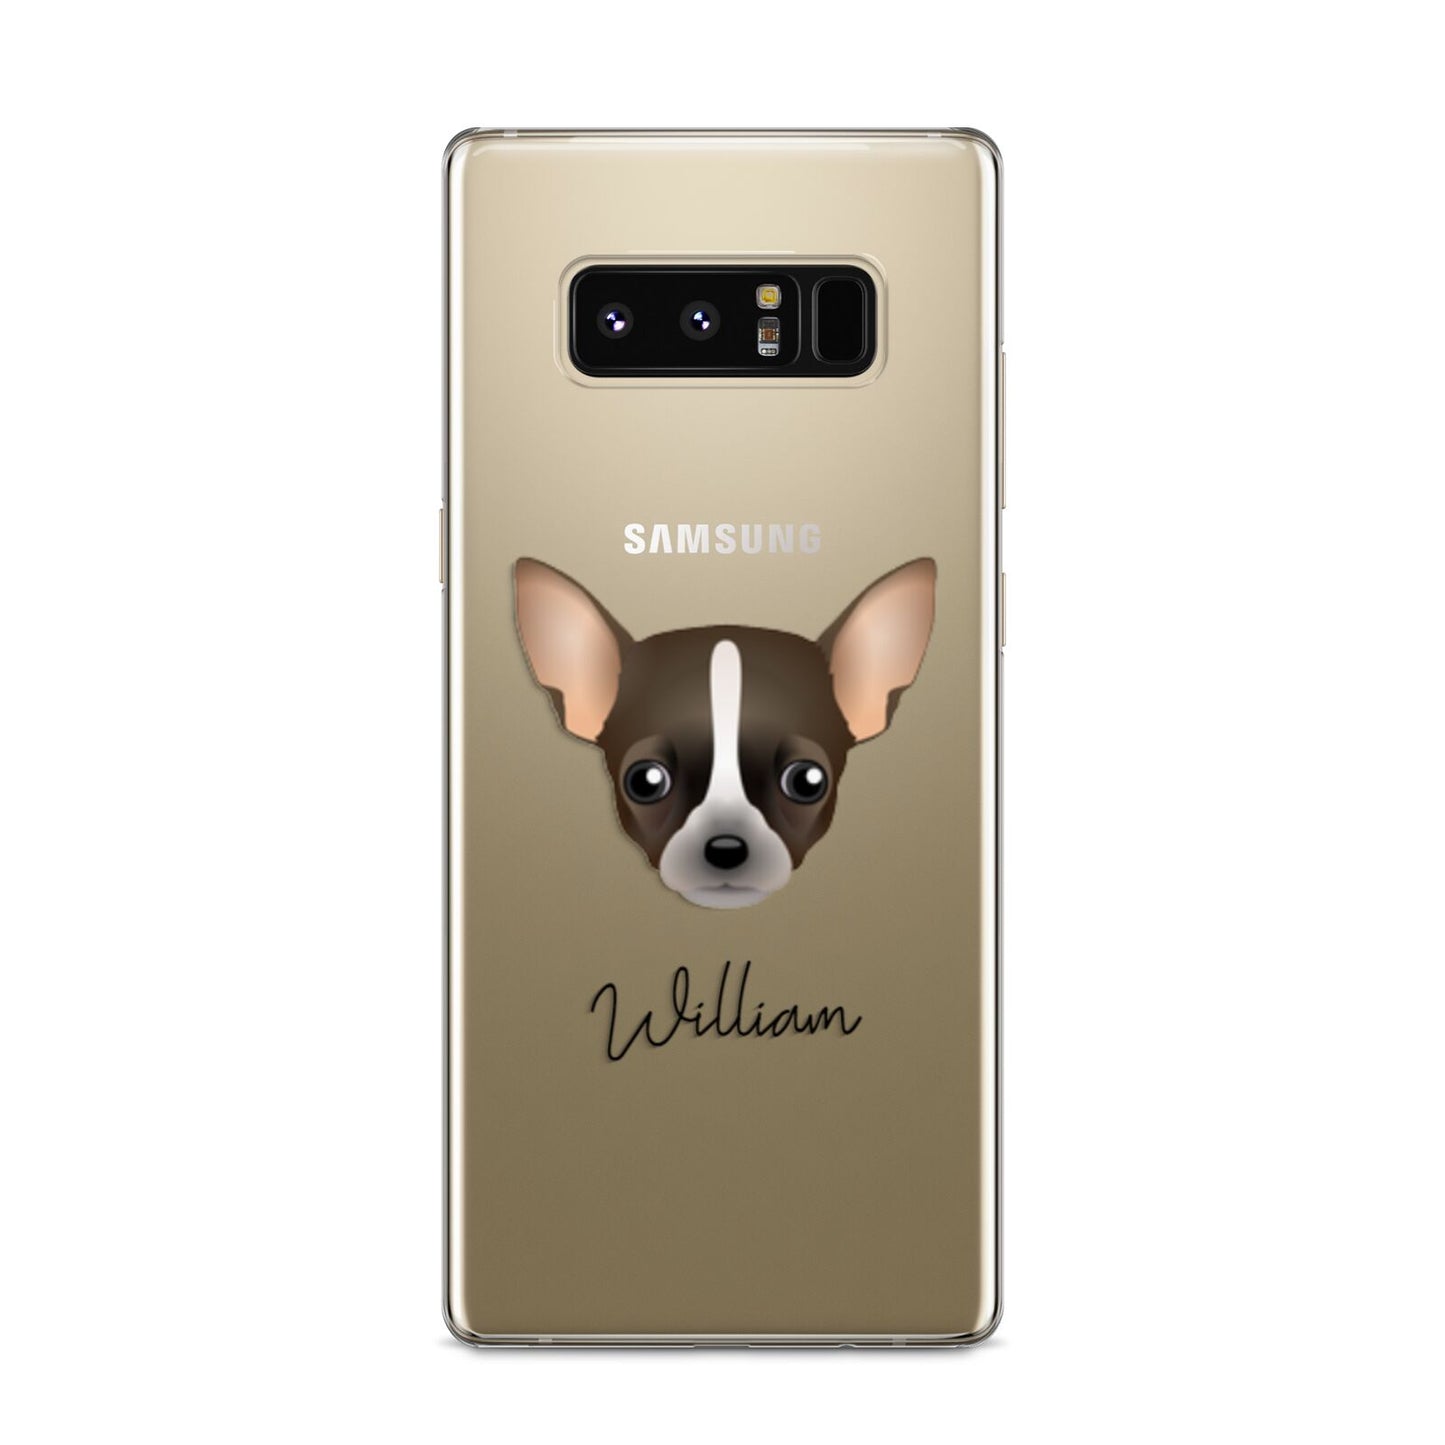 Chihuahua Personalised Samsung Galaxy S8 Case